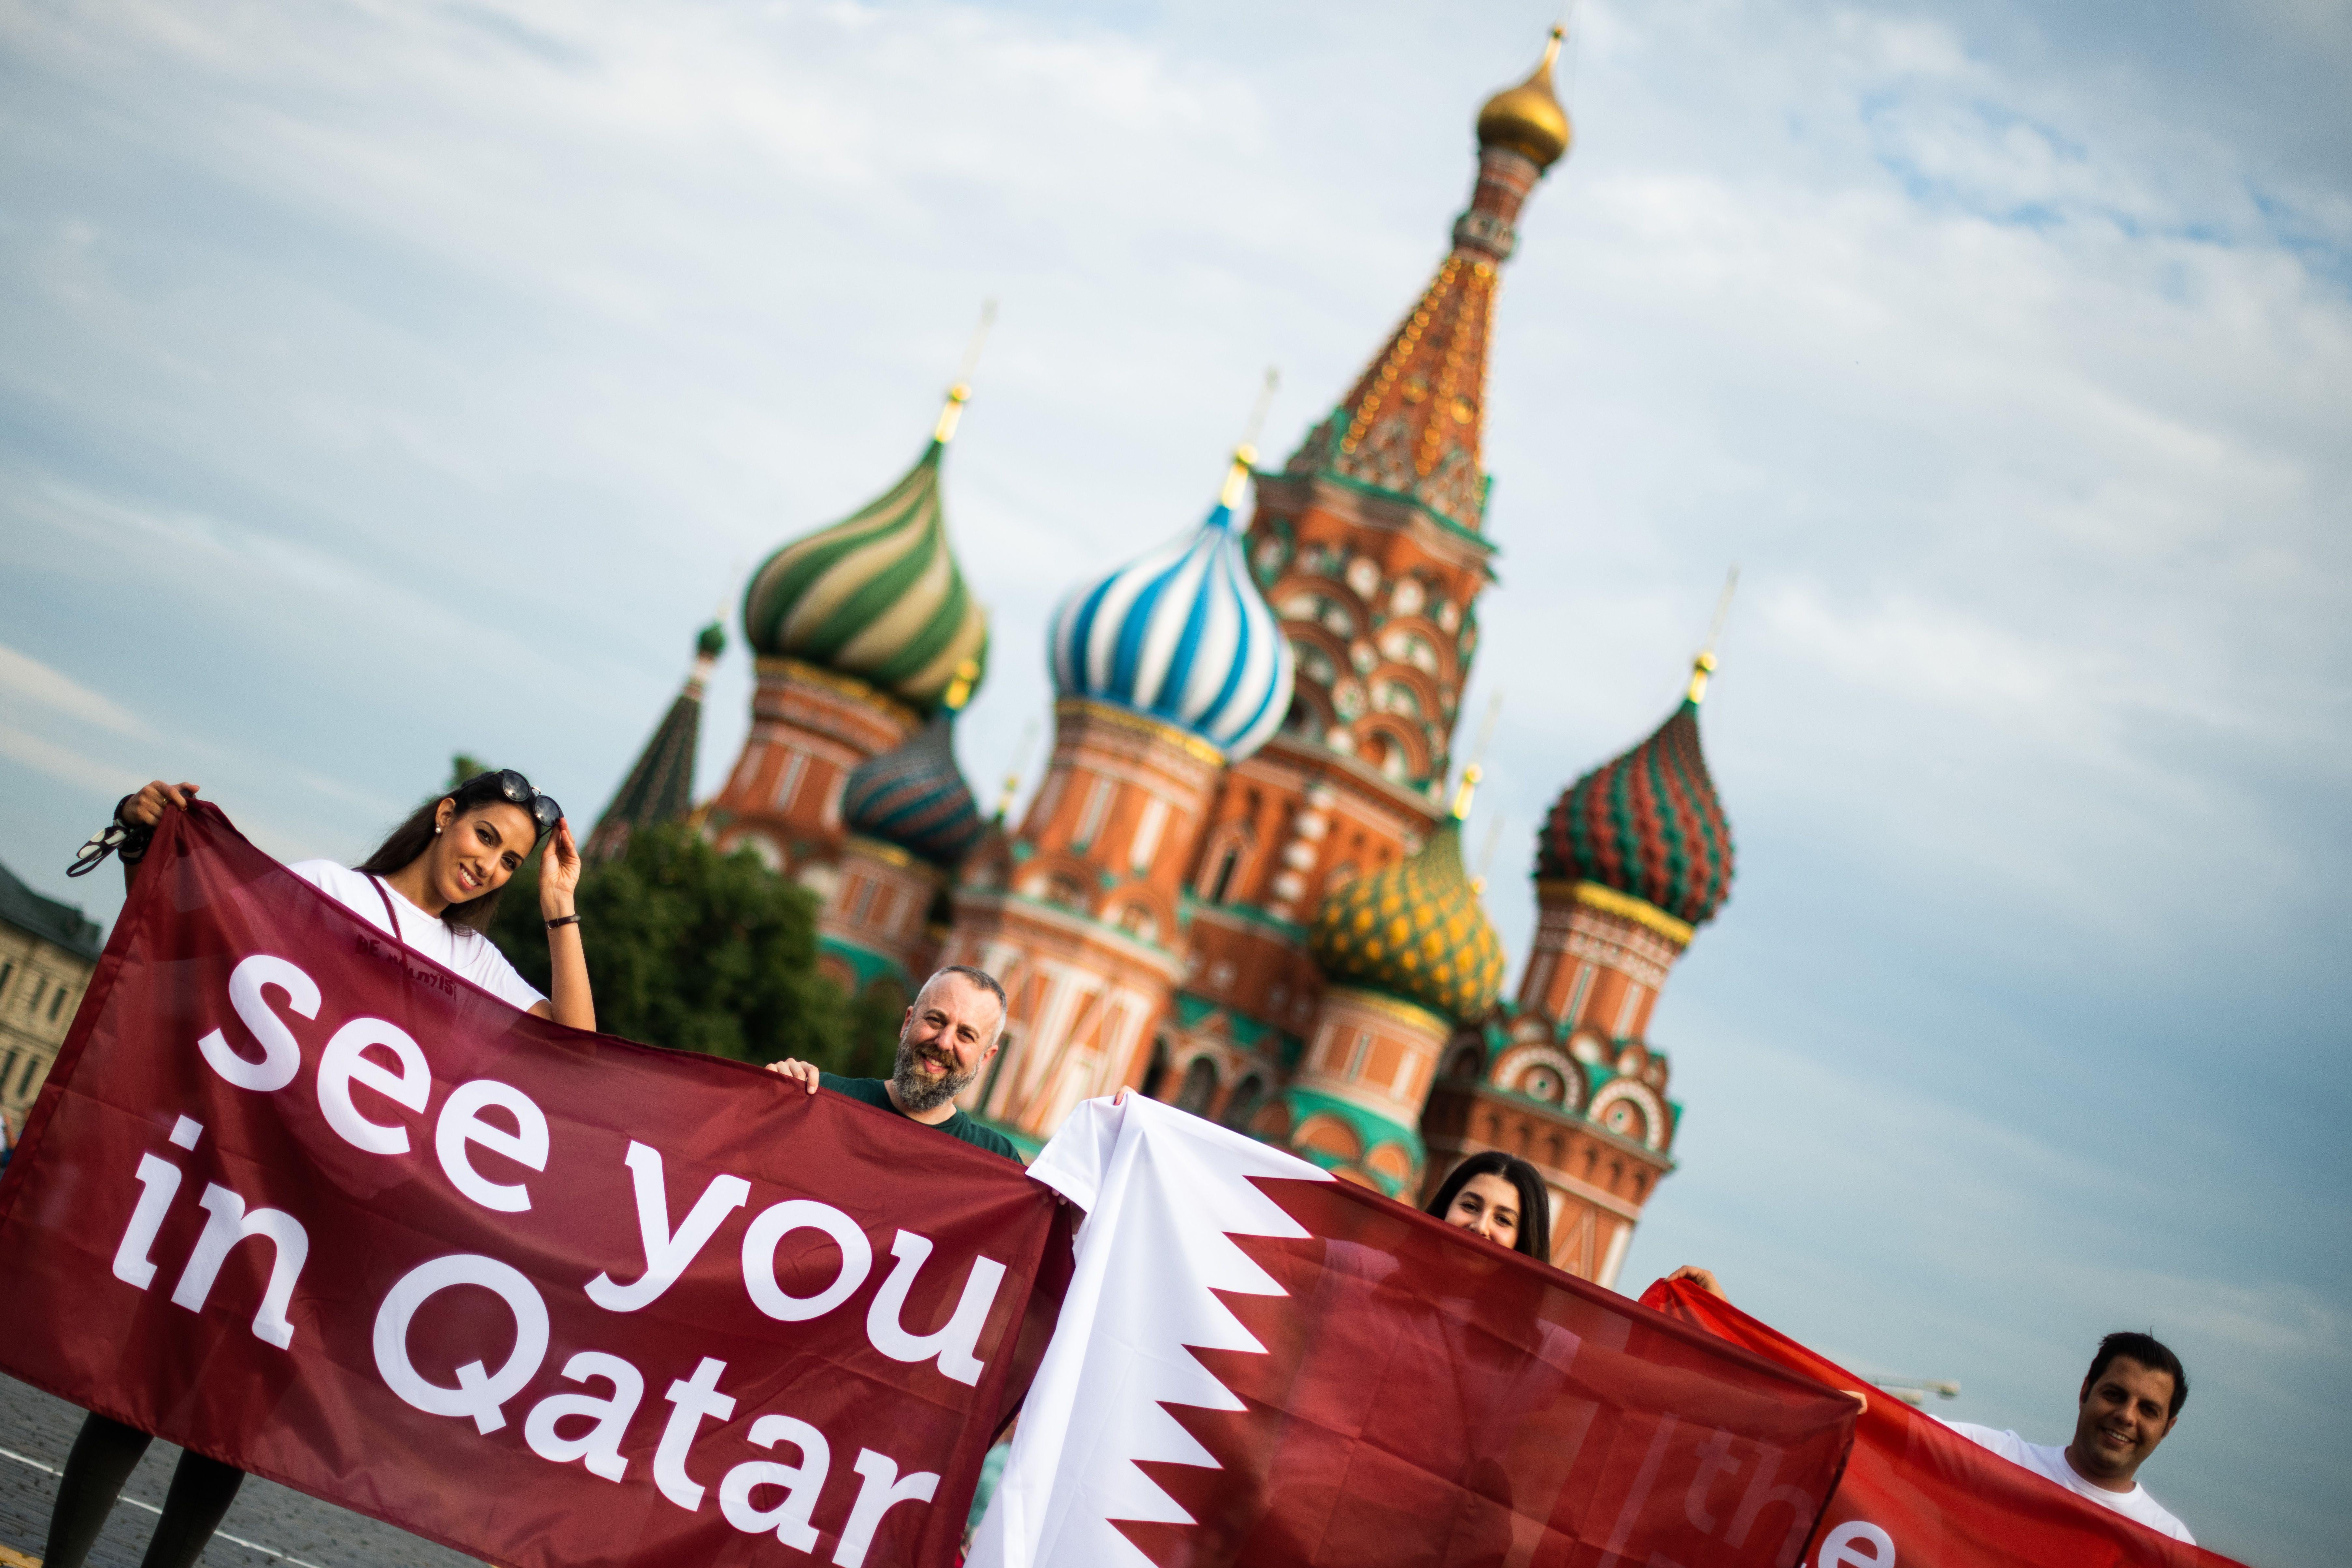 A group of people display a banner reading 'See you in Qatar' in reference to the Qatar 2022 World Cup at the Red Square in Moscow on July 14, 2018 on the eve of the Russia 2018 World Cup final football match between France and Croatia. (Photo by Jewel SAMAD / AFP)        (Photo credit should read JEWEL SAMAD/AFP/Getty Images)